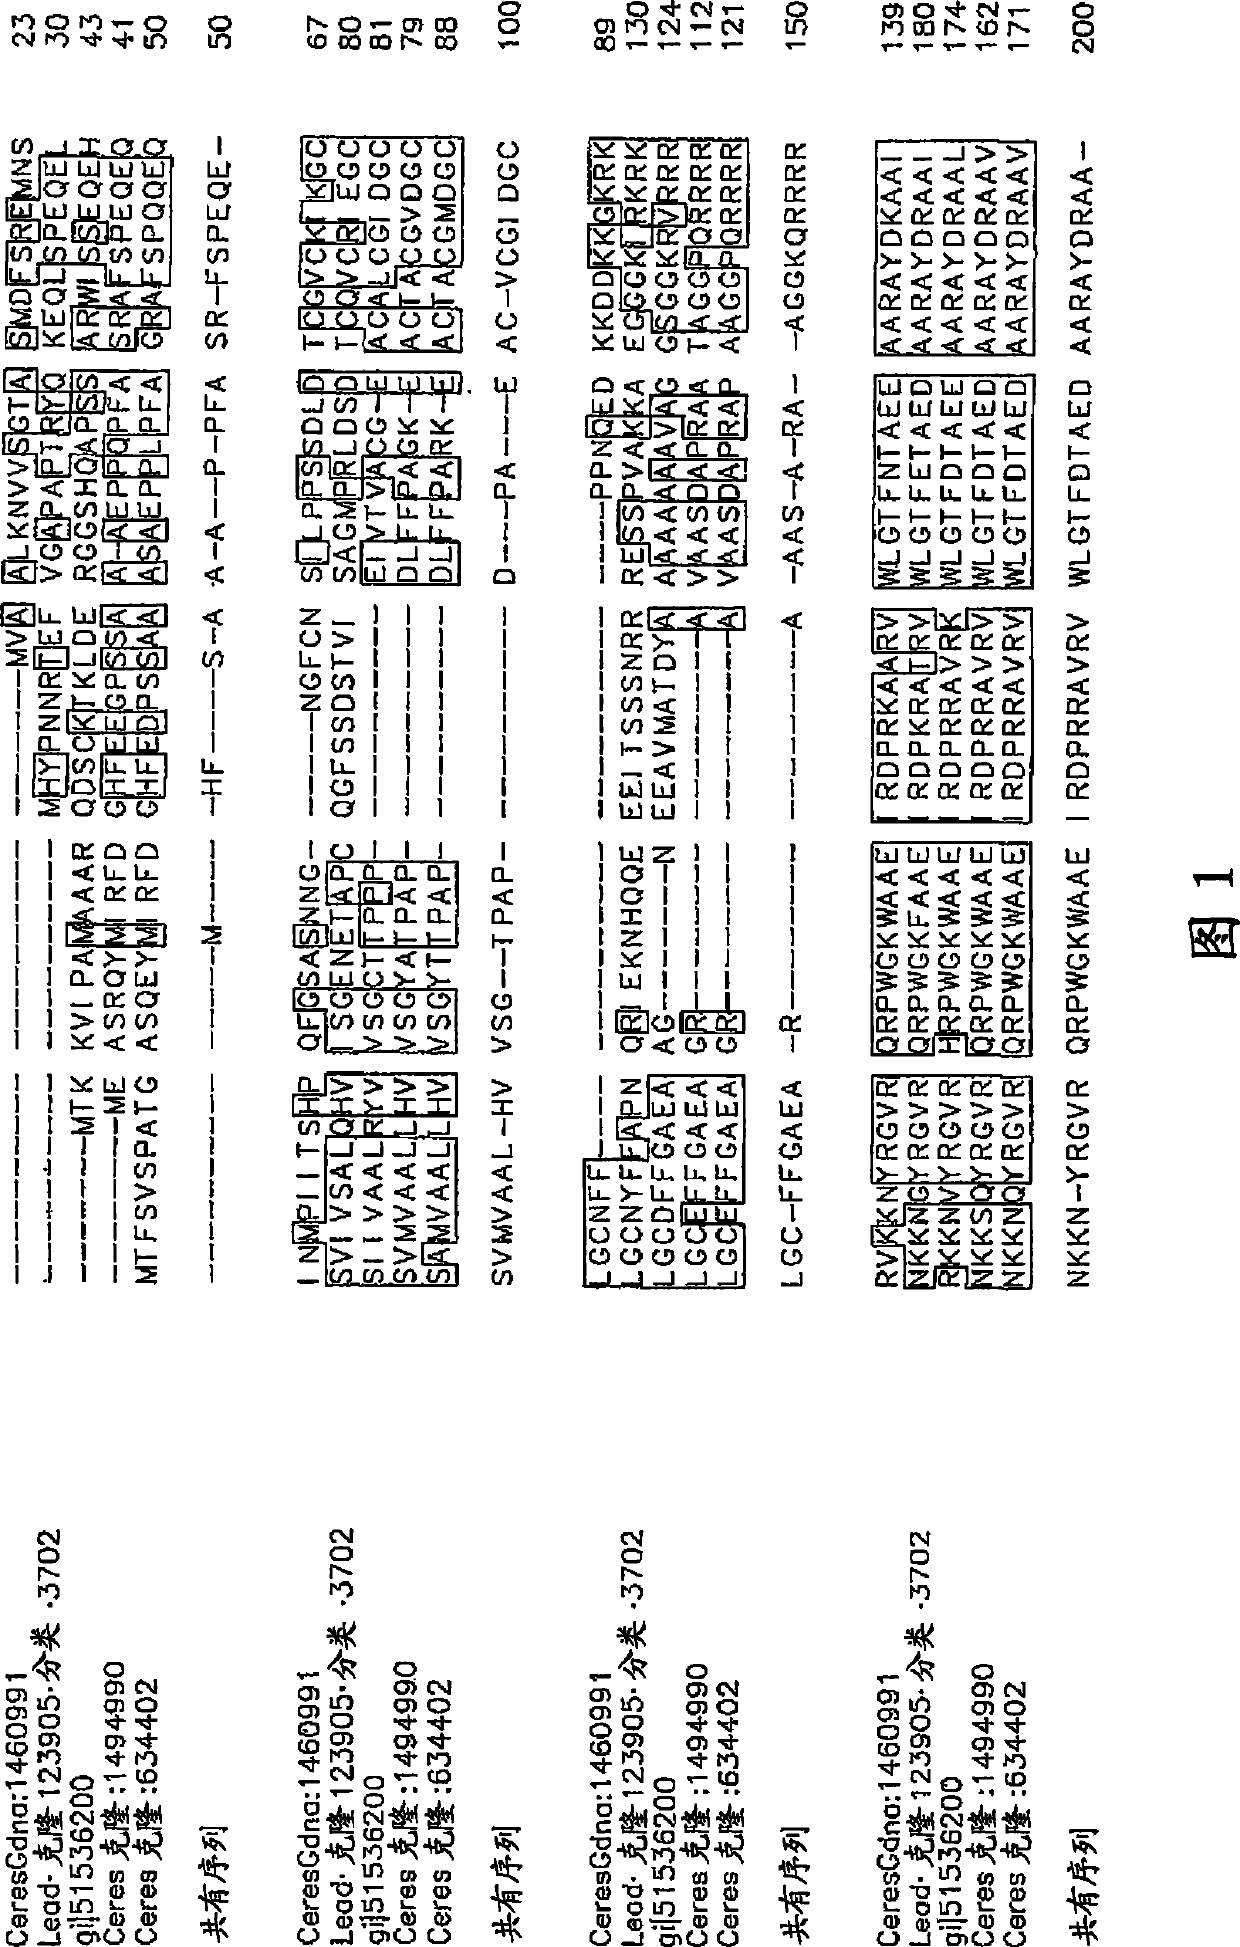 Nucleotide sequence and corresponding polypeptide for endowing plant with adjusted growth velocity and biomass